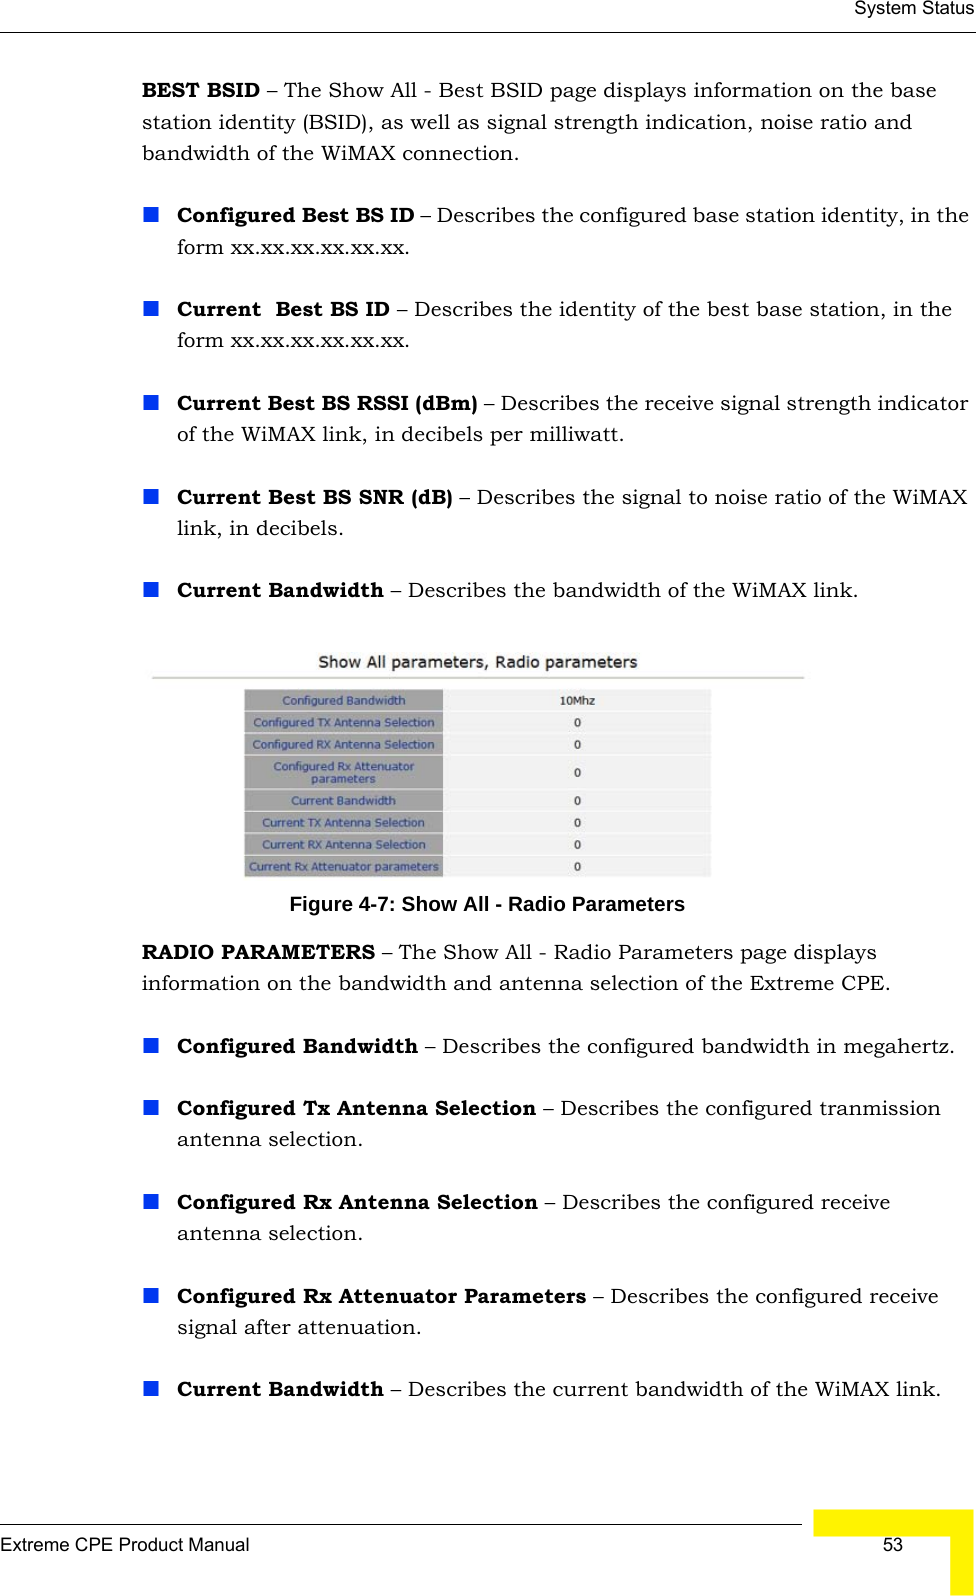 System StatusExtreme CPE Product Manual  53BEST BSID – The Show All - Best BSID page displays information on the base station identity (BSID), as well as signal strength indication, noise ratio and bandwidth of the WiMAX connection.Configured Best BS ID – Describes the configured base station identity, in the form xx.xx.xx.xx.xx.xx.Current  Best BS ID – Describes the identity of the best base station, in the form xx.xx.xx.xx.xx.xx.Current Best BS RSSI (dBm) – Describes the receive signal strength indicator of the WiMAX link, in decibels per milliwatt.Current Best BS SNR (dB) – Describes the signal to noise ratio of the WiMAX link, in decibels.Current Bandwidth – Describes the bandwidth of the WiMAX link.Figure 4-7: Show All - Radio ParametersRADIO PARAMETERS – The Show All - Radio Parameters page displays information on the bandwidth and antenna selection of the Extreme CPE.Configured Bandwidth – Describes the configured bandwidth in megahertz.Configured Tx Antenna Selection – Describes the configured tranmission antenna selection.Configured Rx Antenna Selection – Describes the configured receive antenna selection.Configured Rx Attenuator Parameters – Describes the configured receive signal after attenuation.Current Bandwidth – Describes the current bandwidth of the WiMAX link.